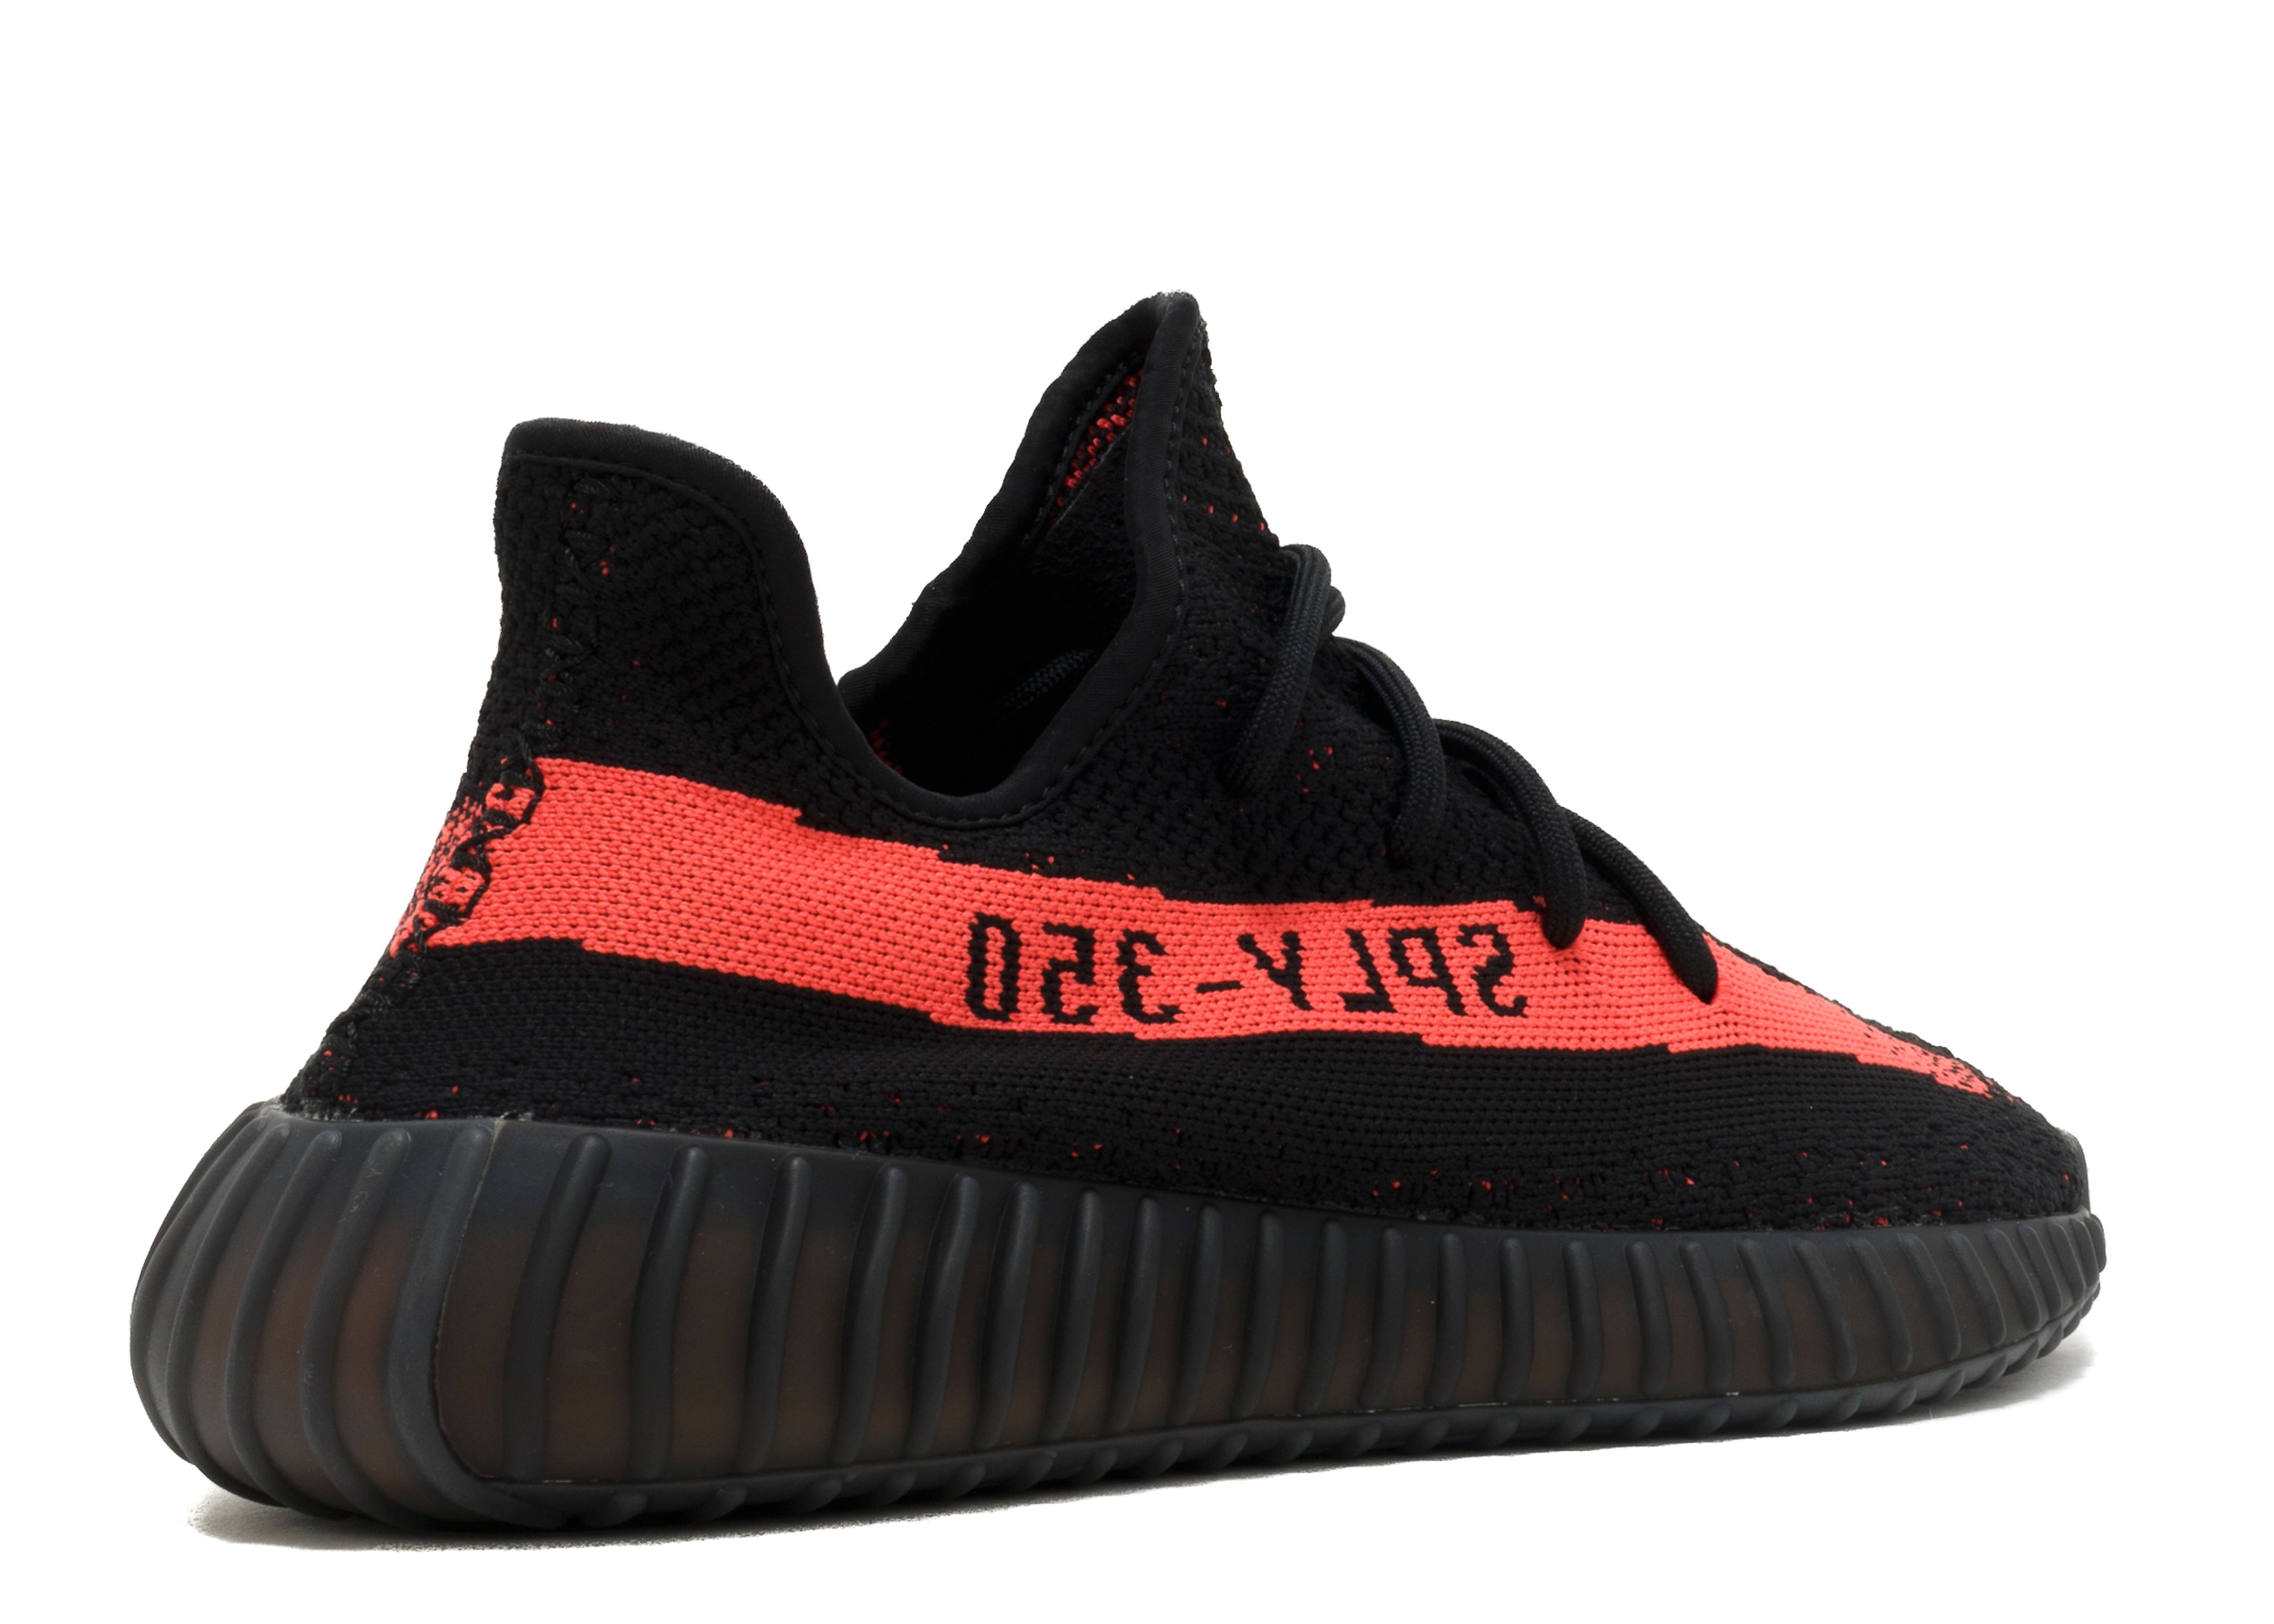 Yeezy Boost 350 v2 Black Red Size 6.5 BY 9612 DS Ships Fast Adidas